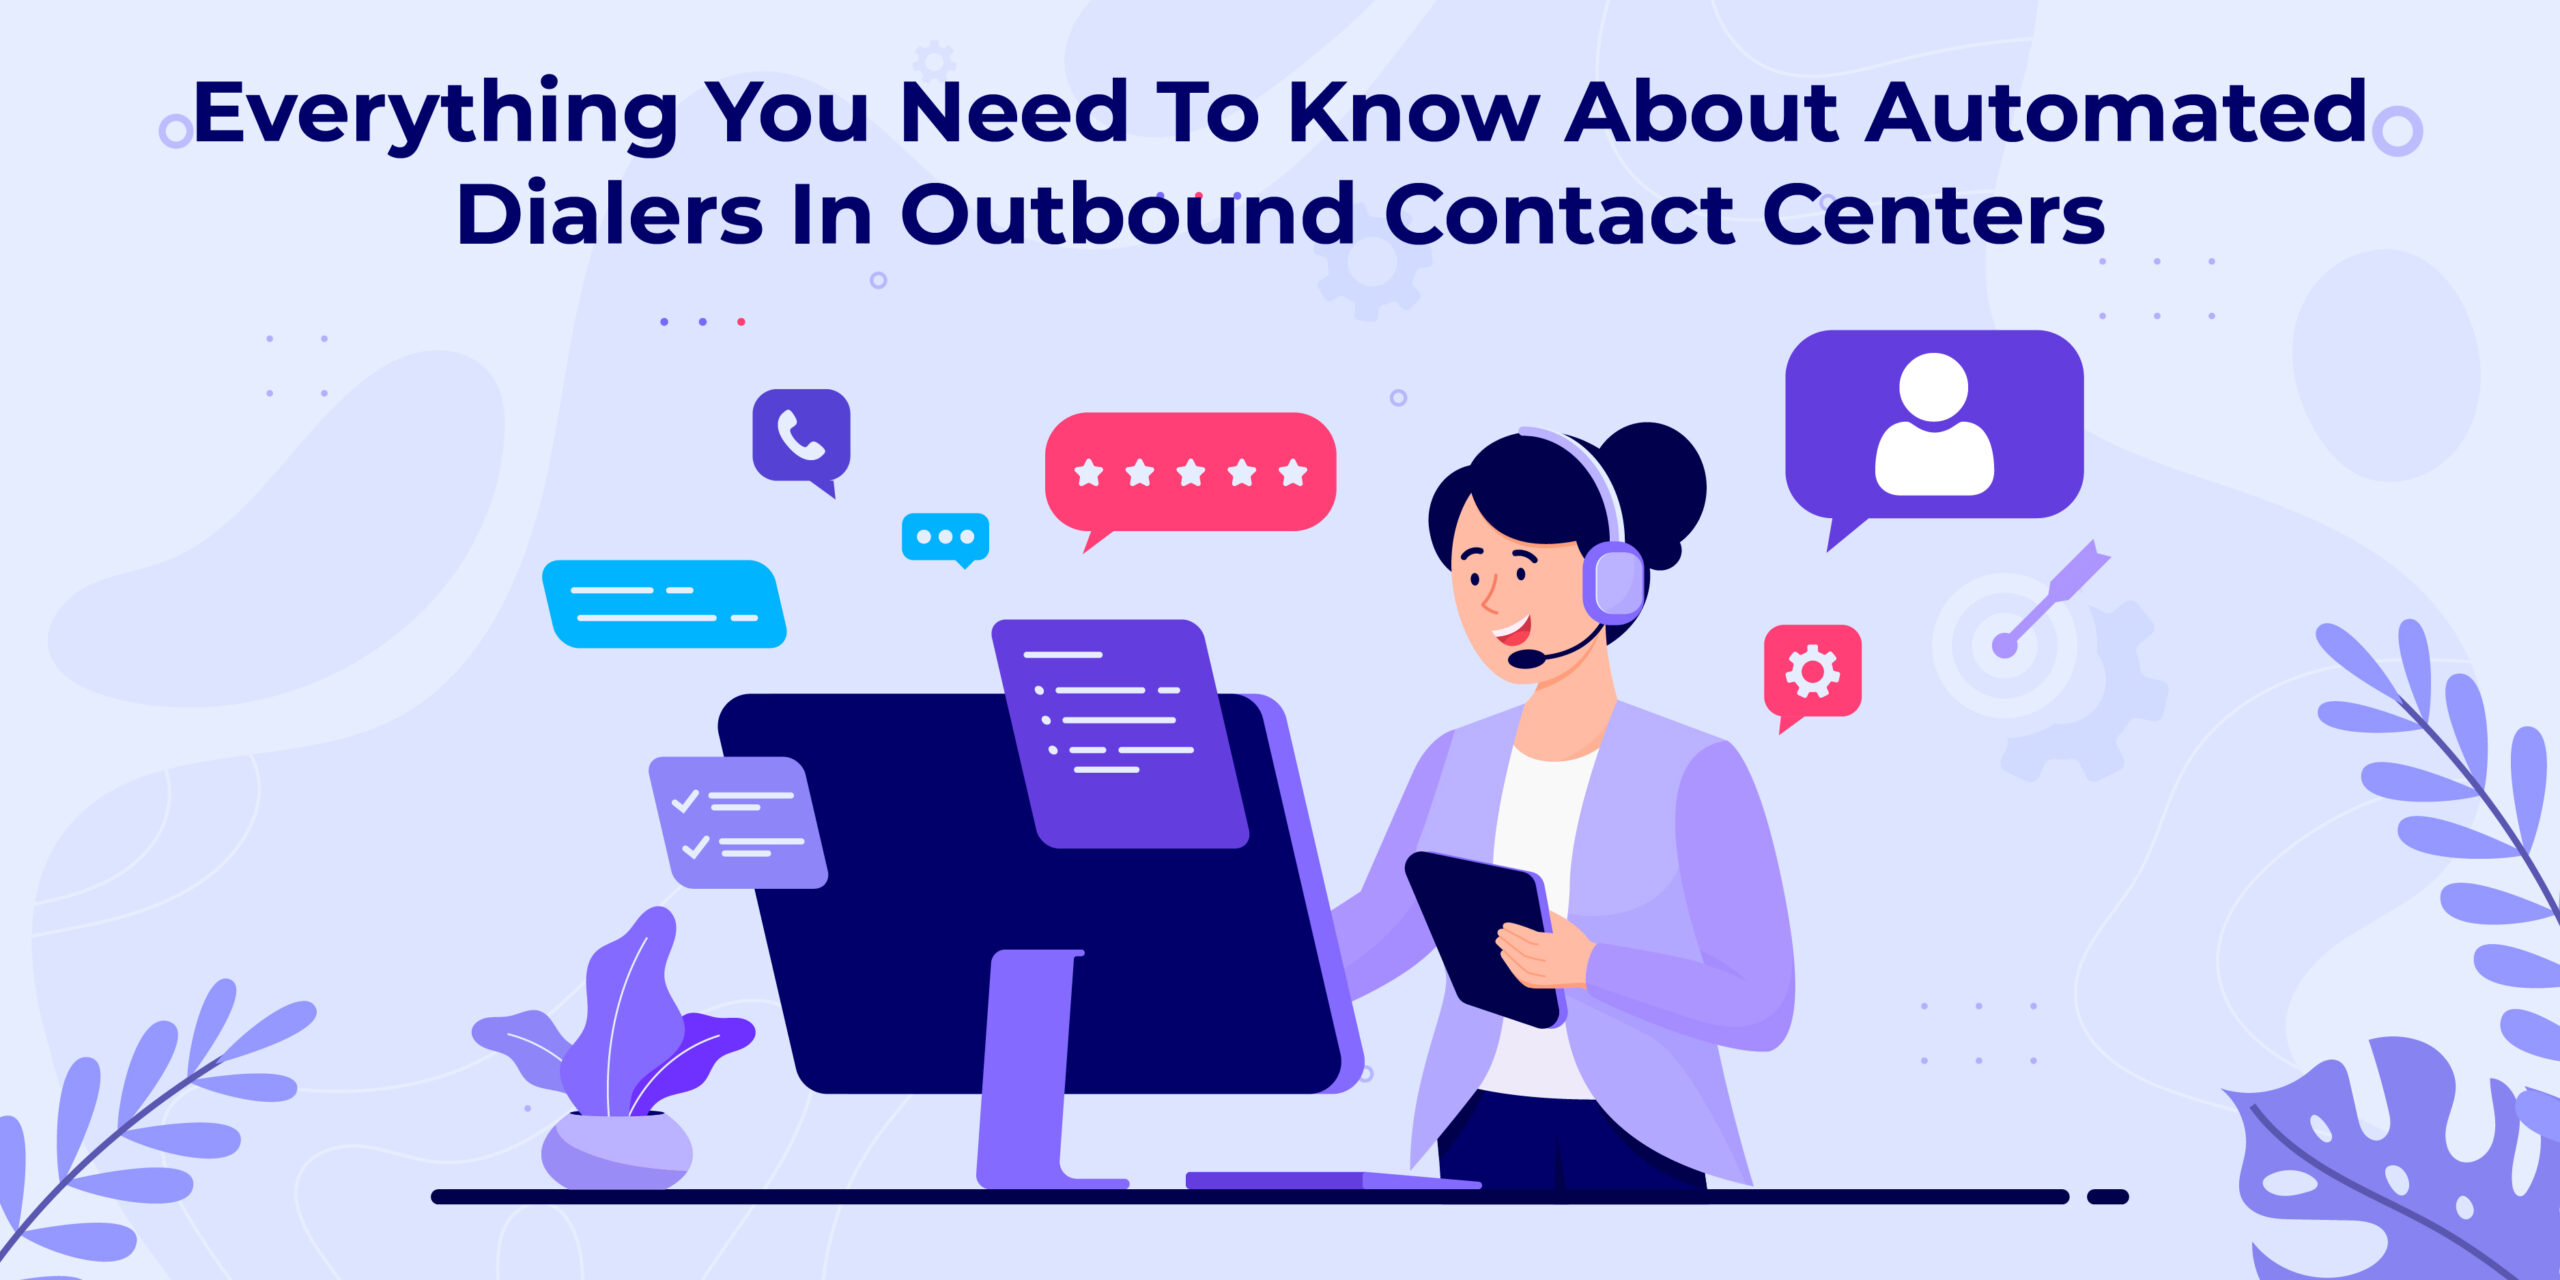 Contact Centers Automate Dialers